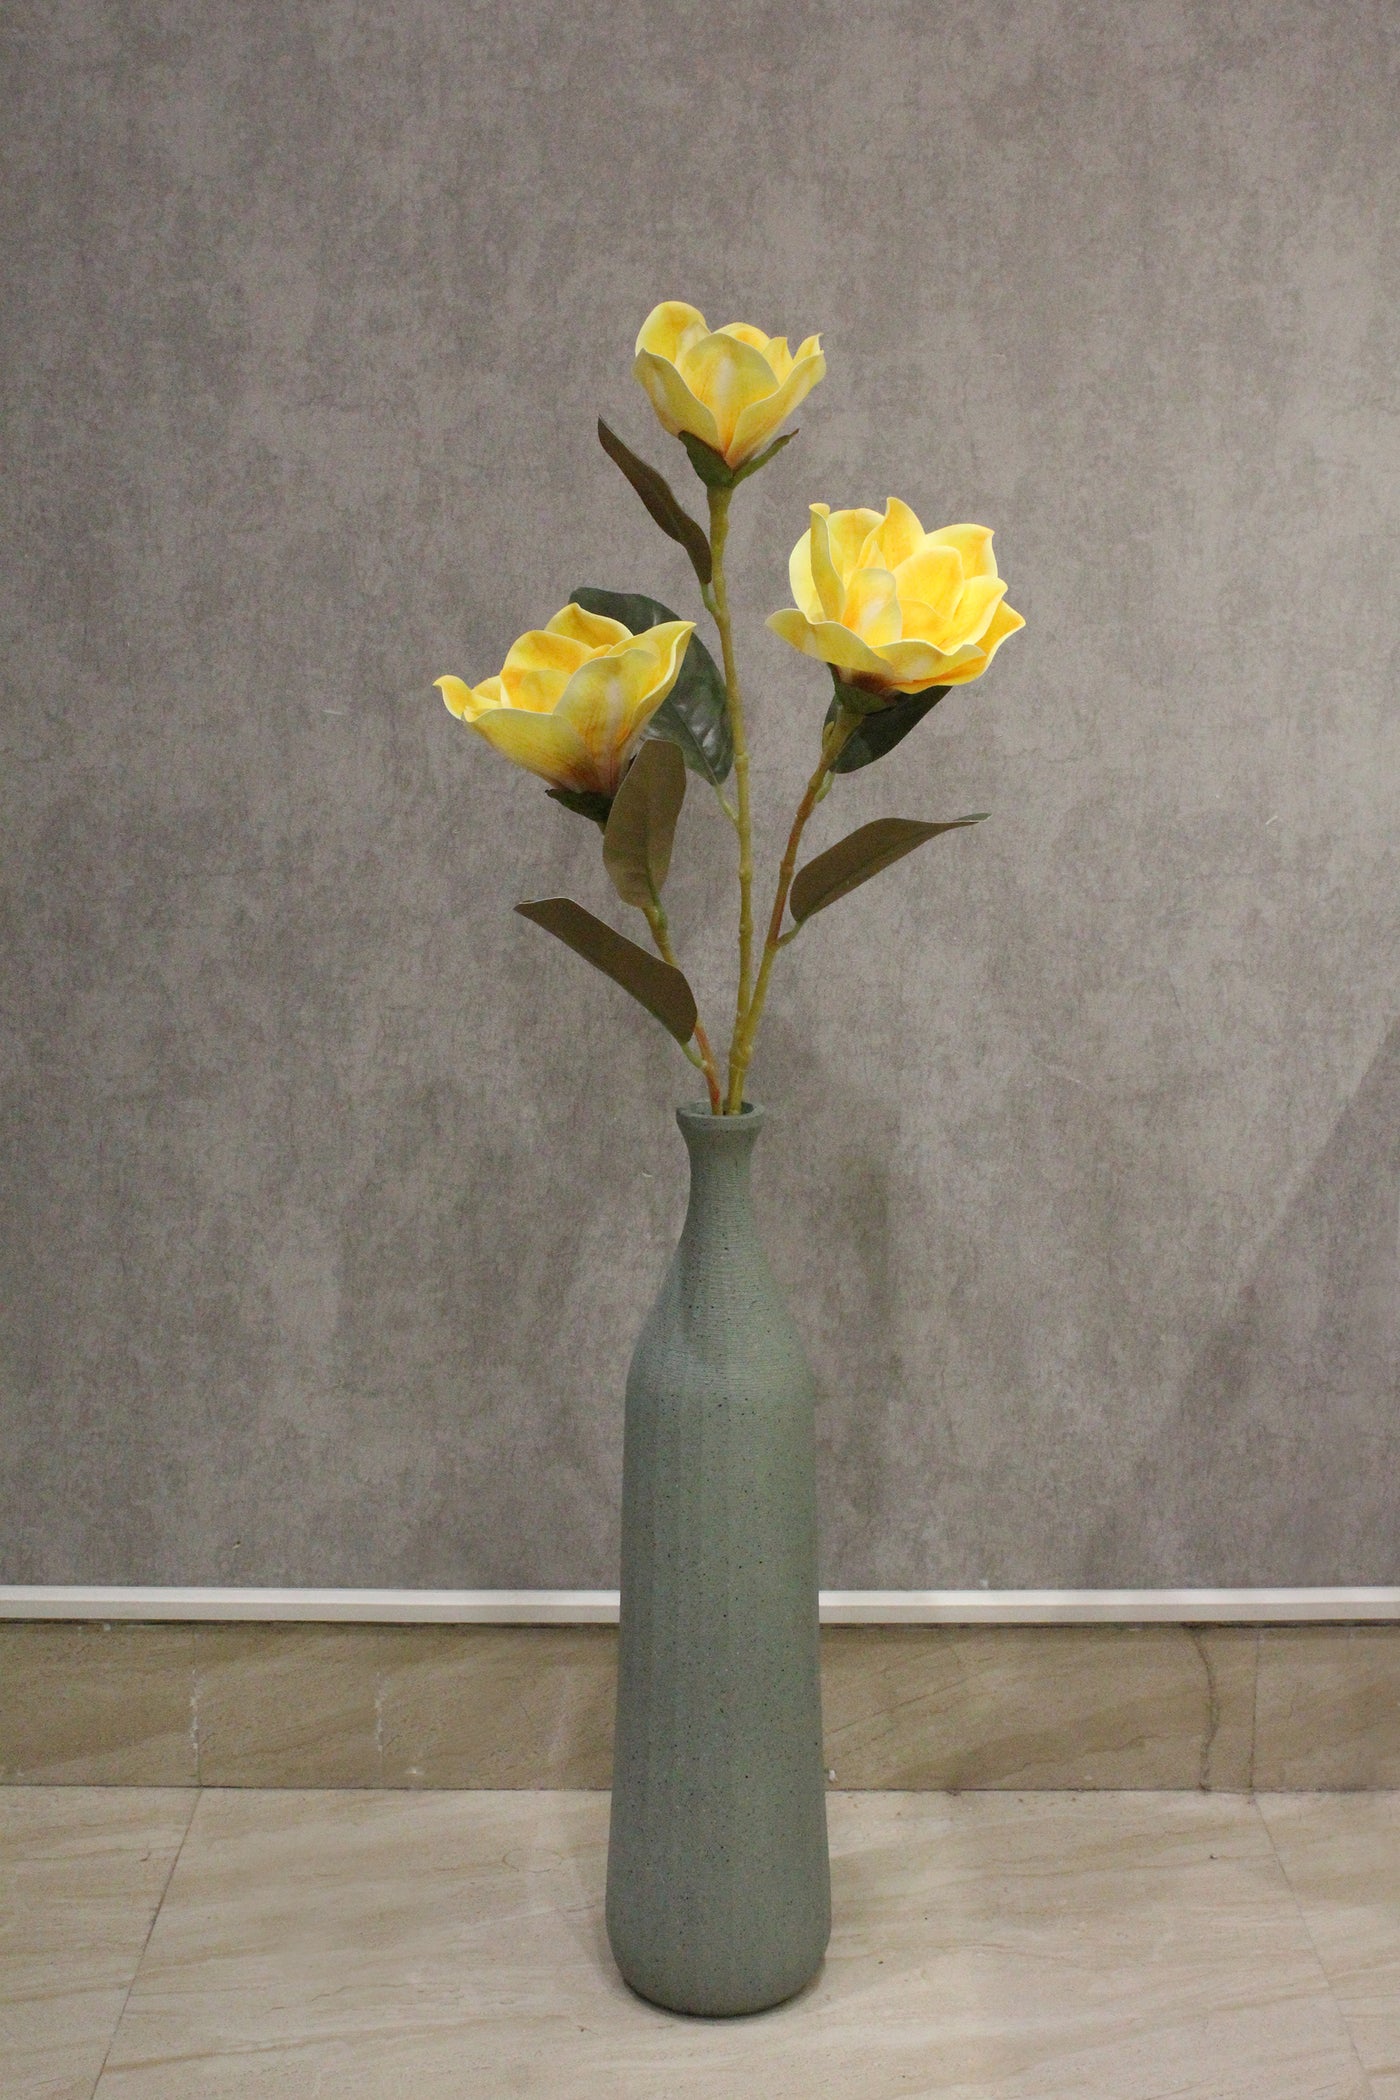 Artificial Magnolia Flowers for your Home or Office